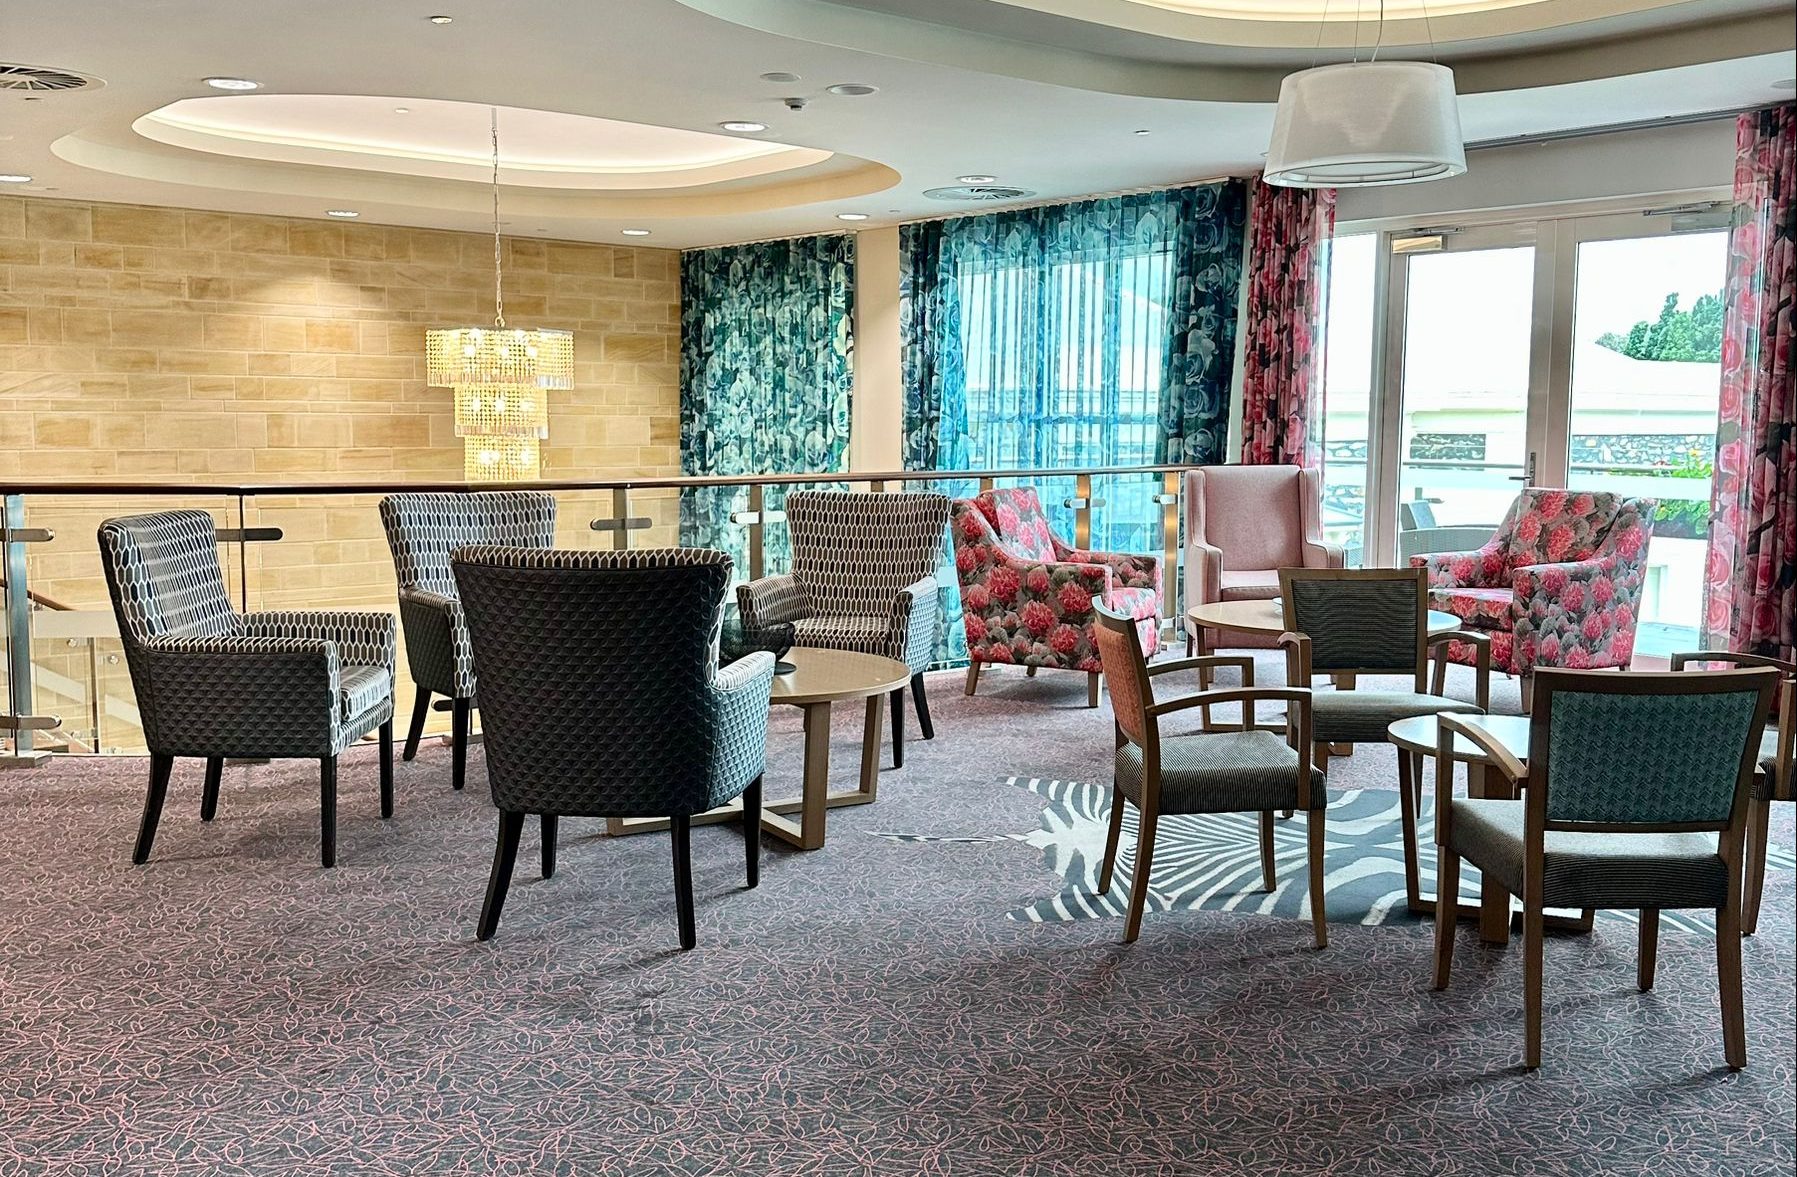 importance of design in an aged care setting. Custom seating in open area, encouraging comfort and socialisation. 